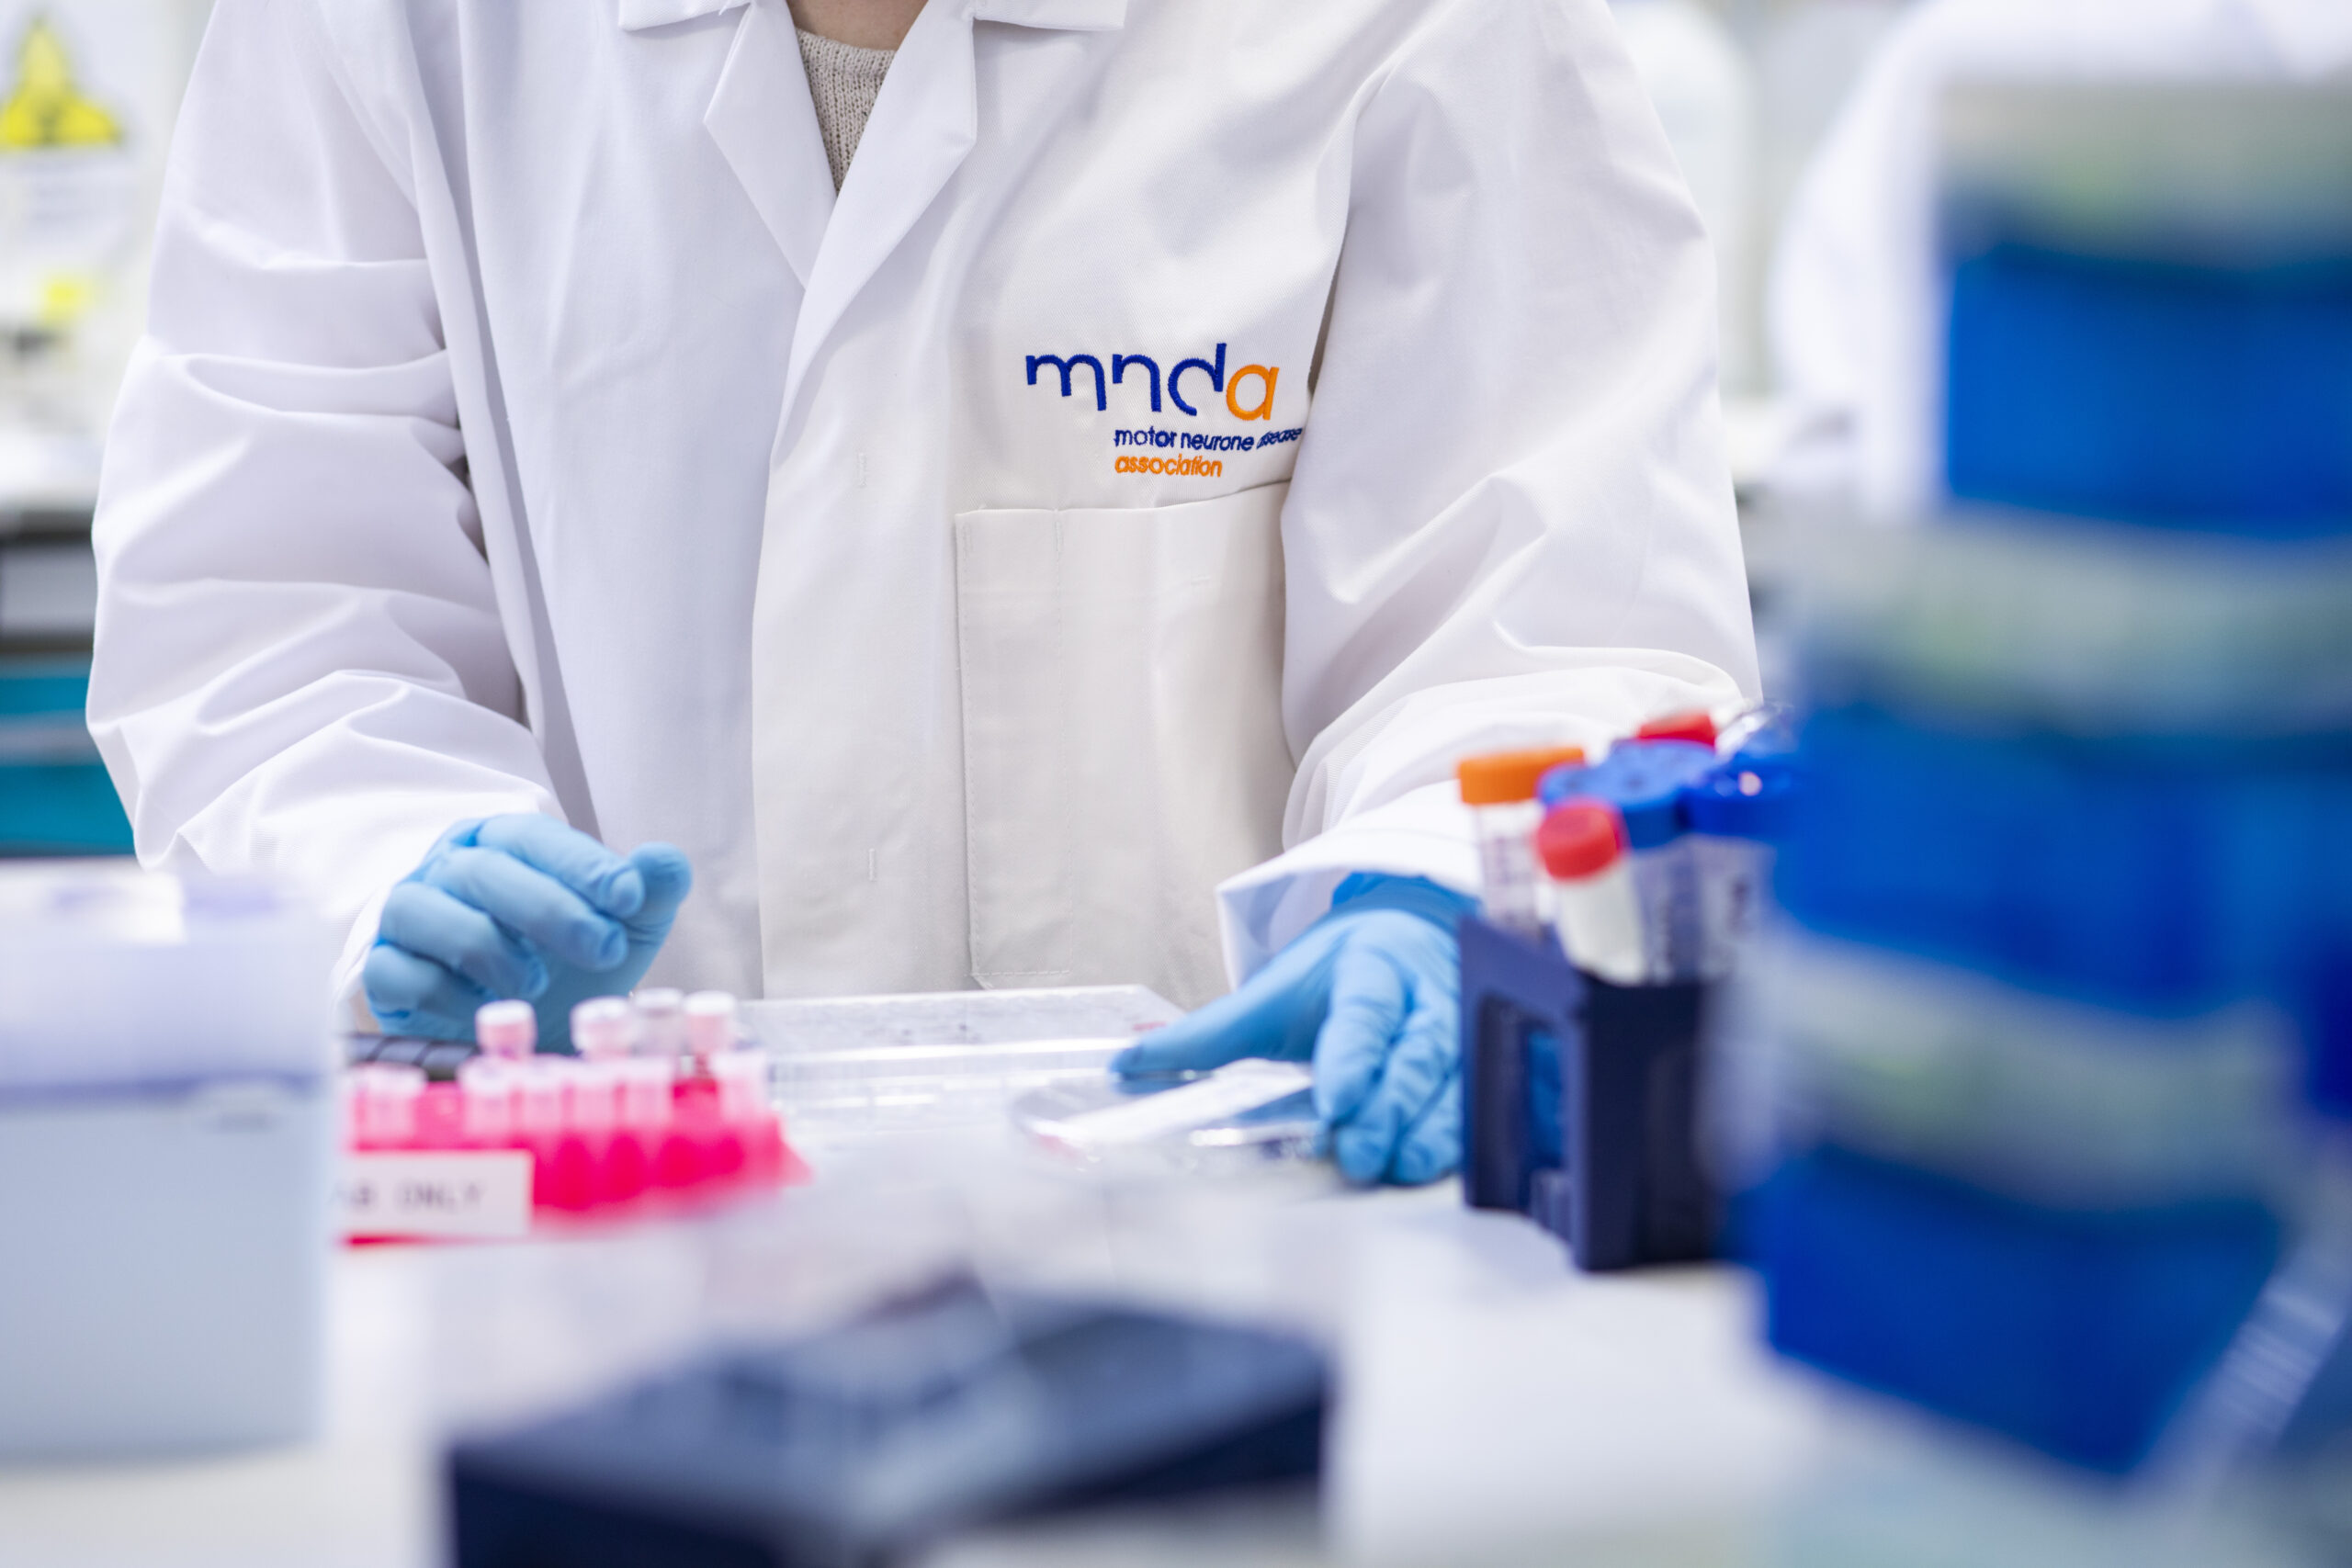 MAGNET: A new MND clinical platform trial now recruiting in the UK